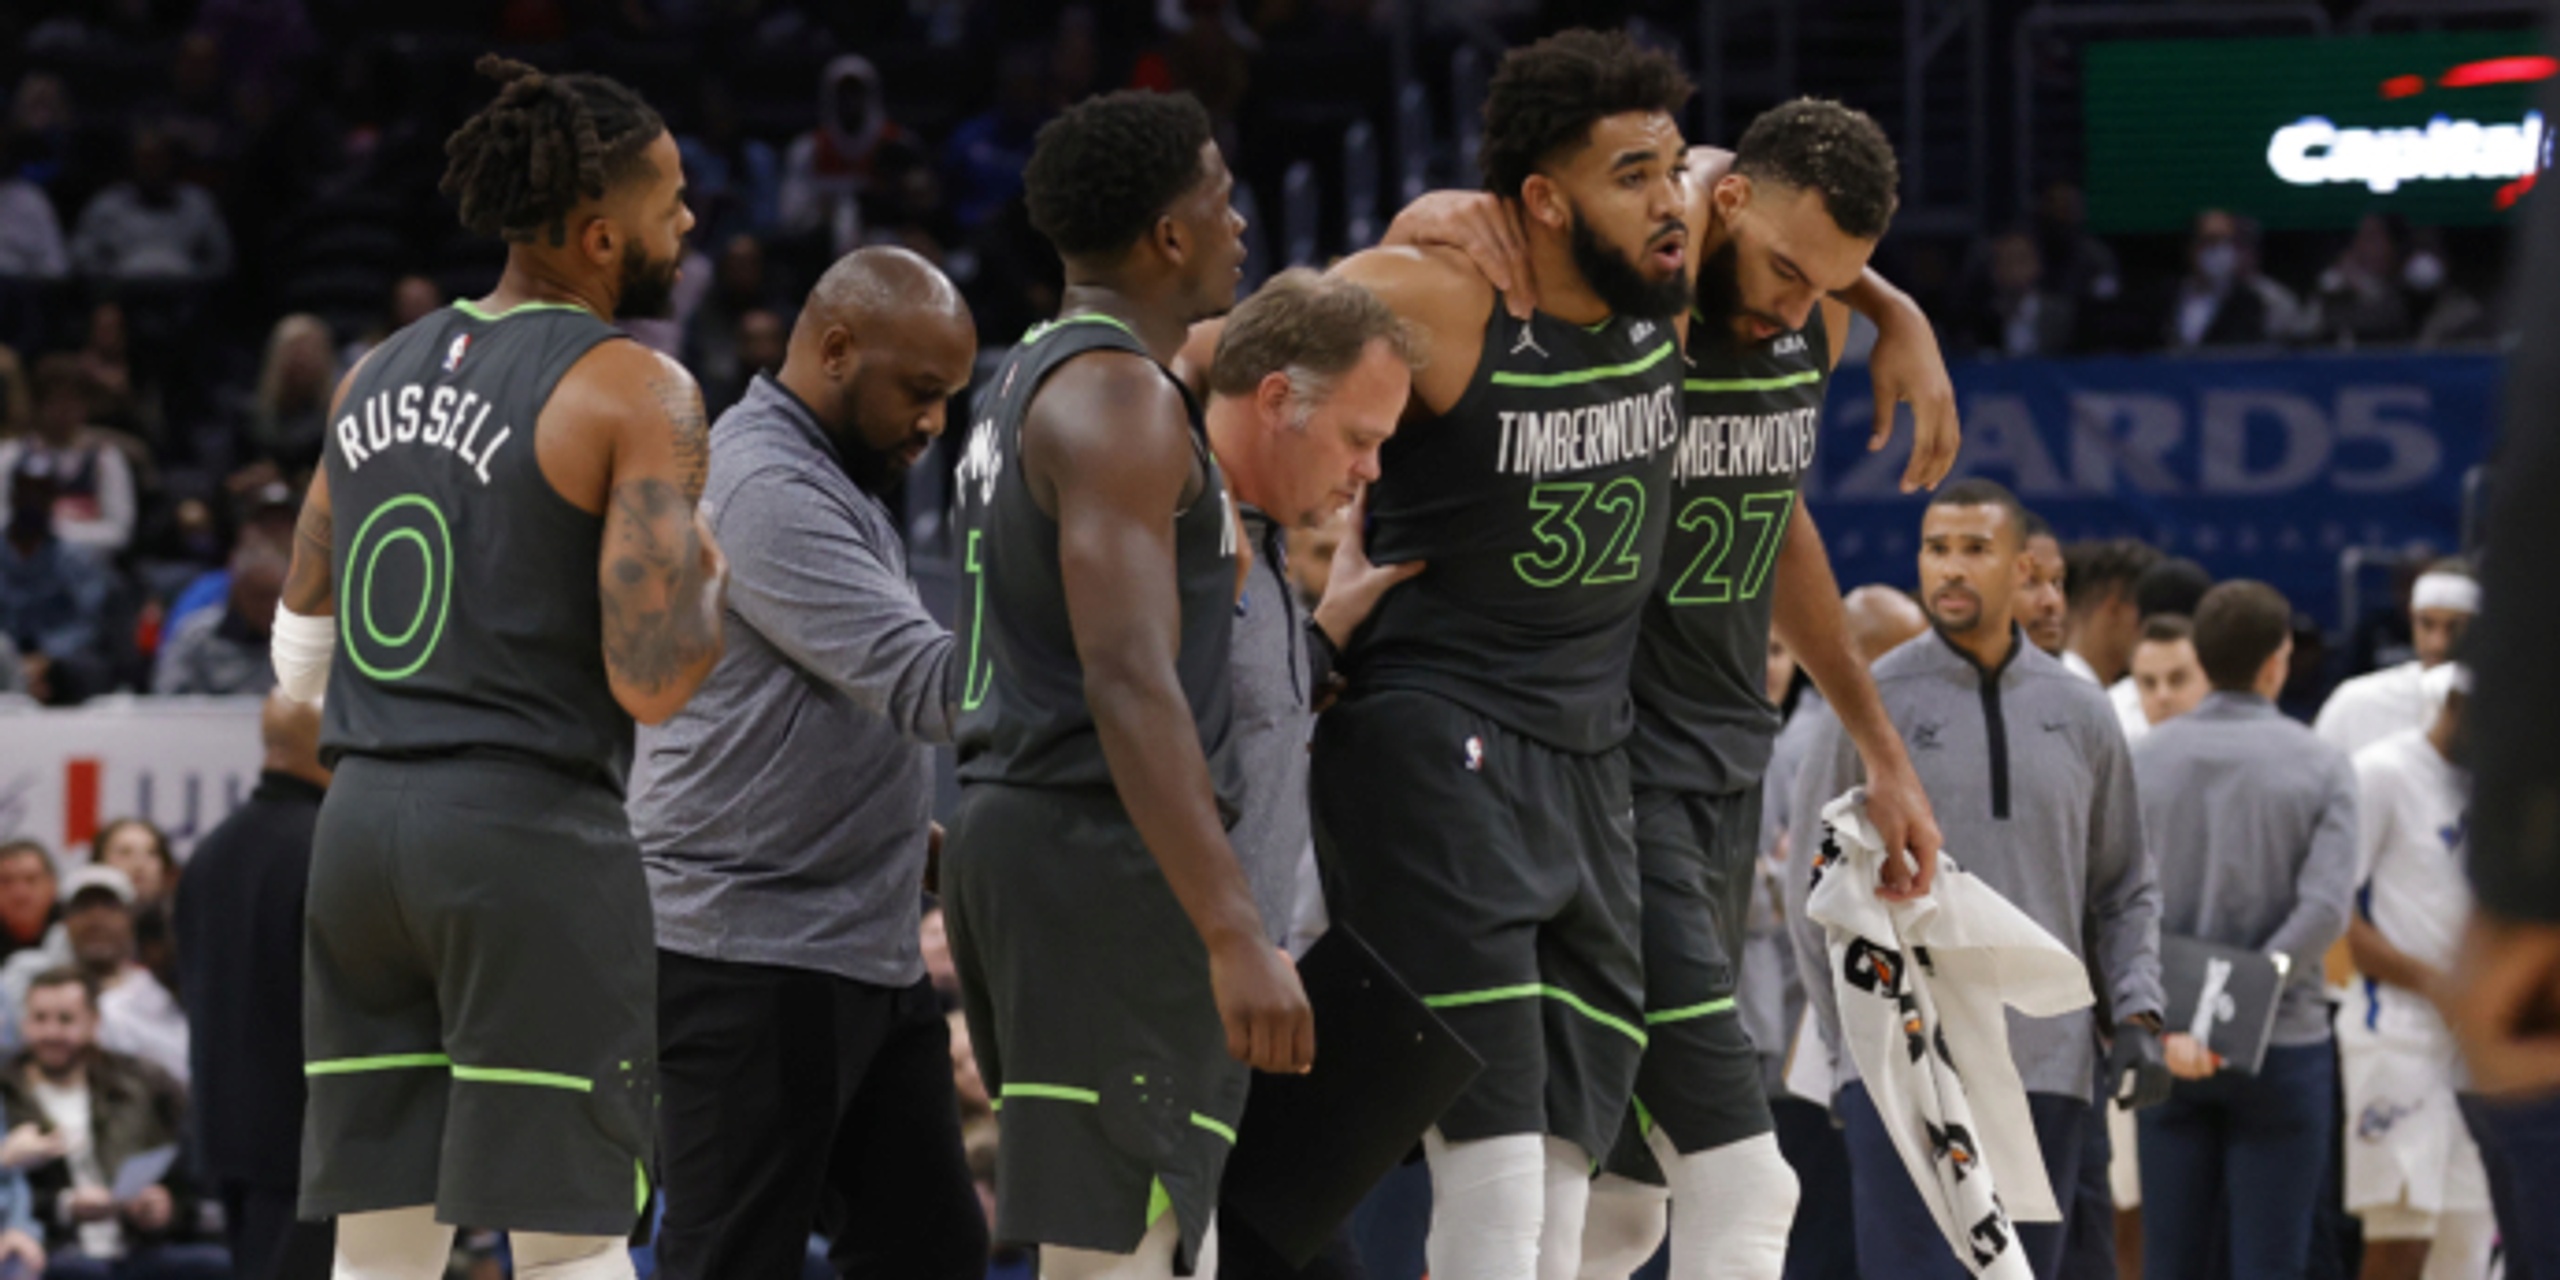 Karl-Anthony Towns likely out 4-6 weeks with strained calf